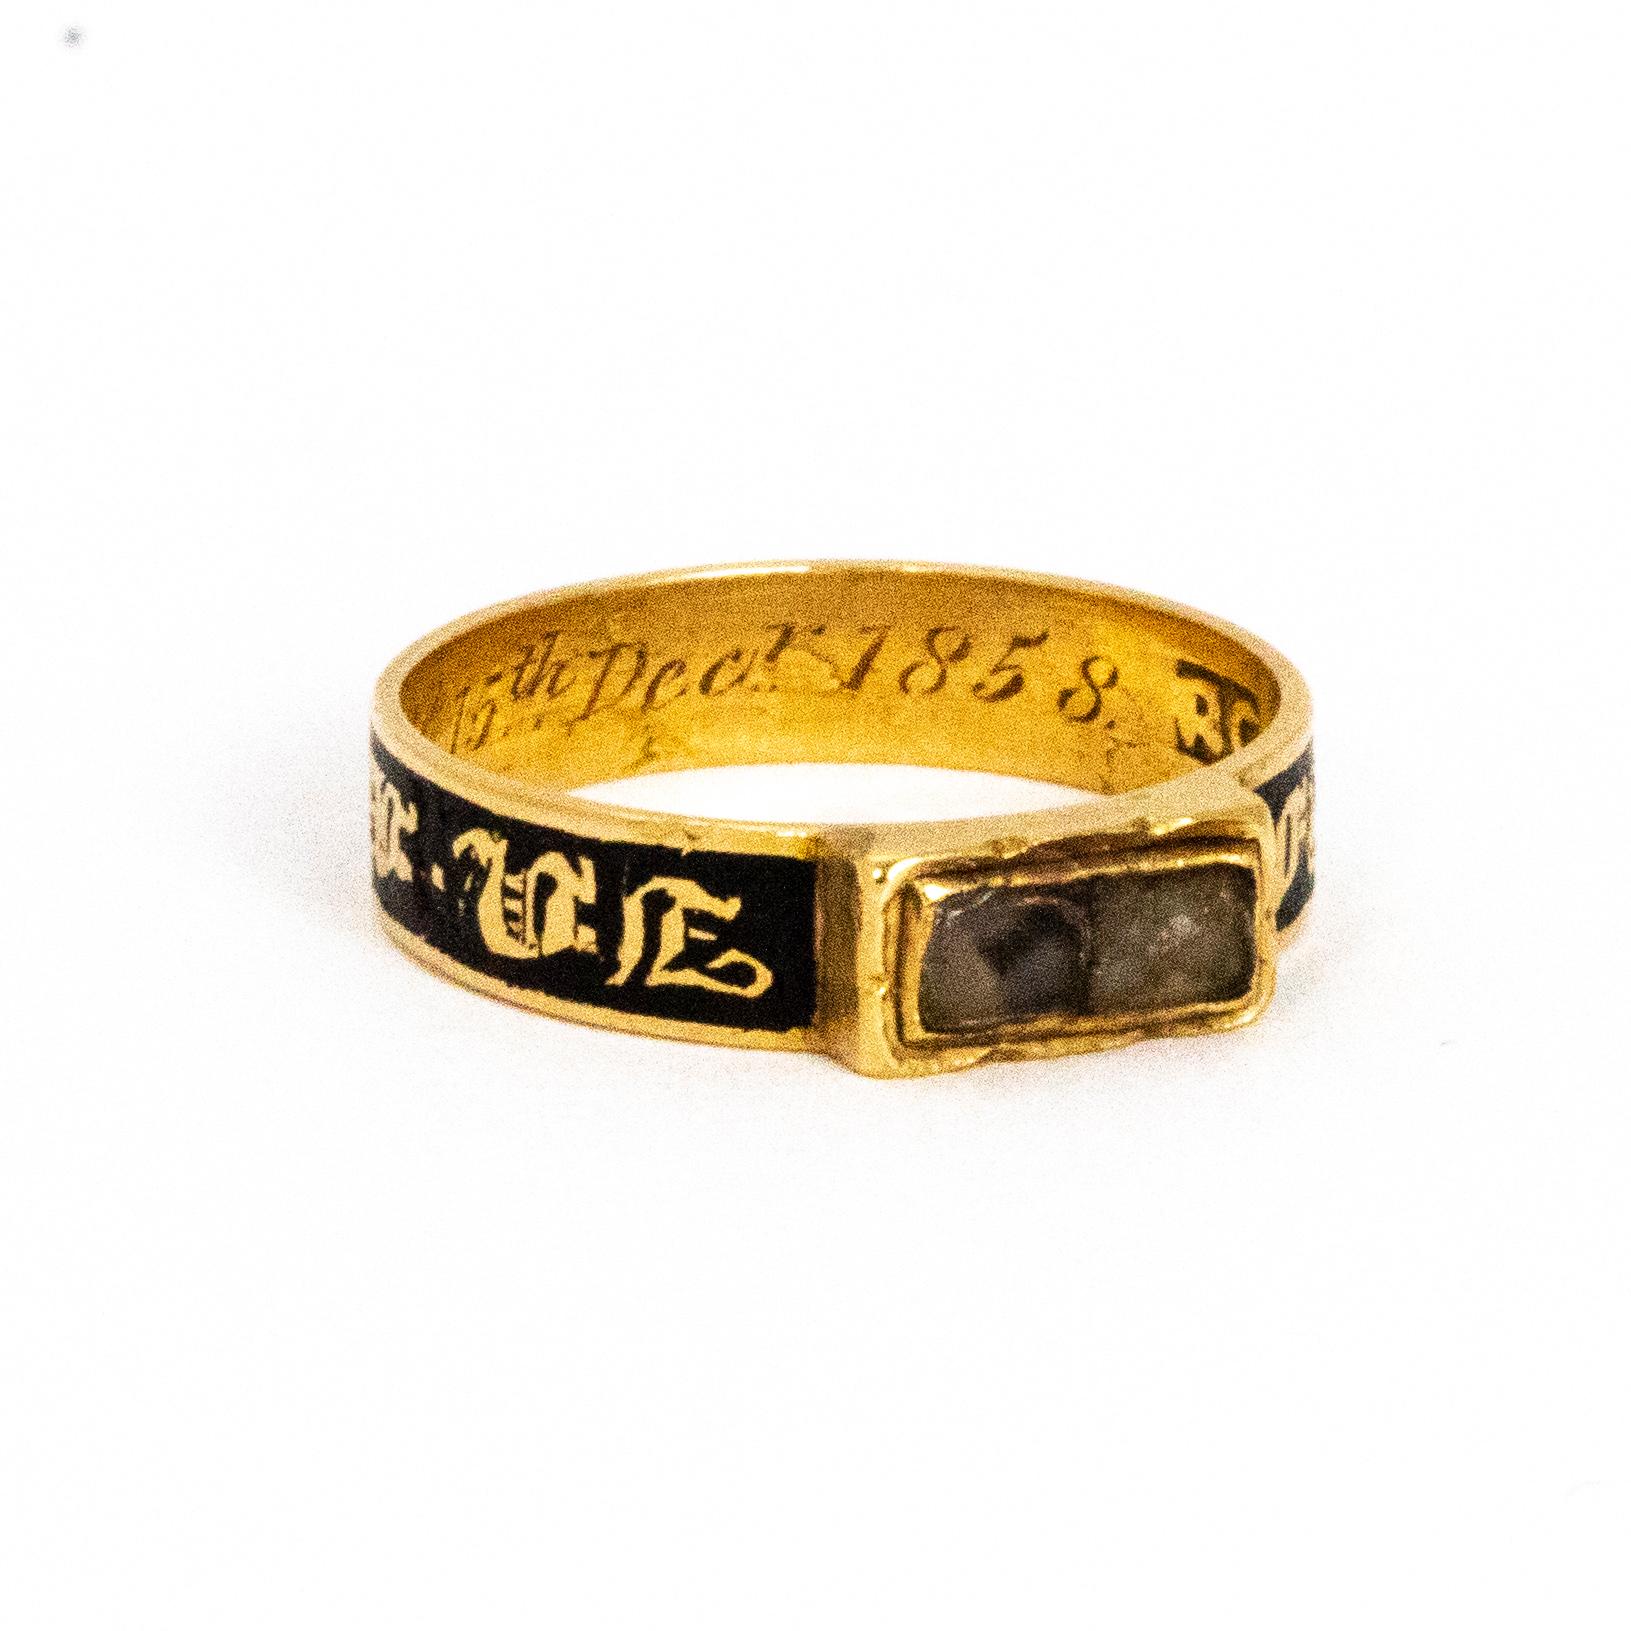 Mid Victorian Glazed Locket Front 18 Carat Gold and Enamel Mourning Ring 1